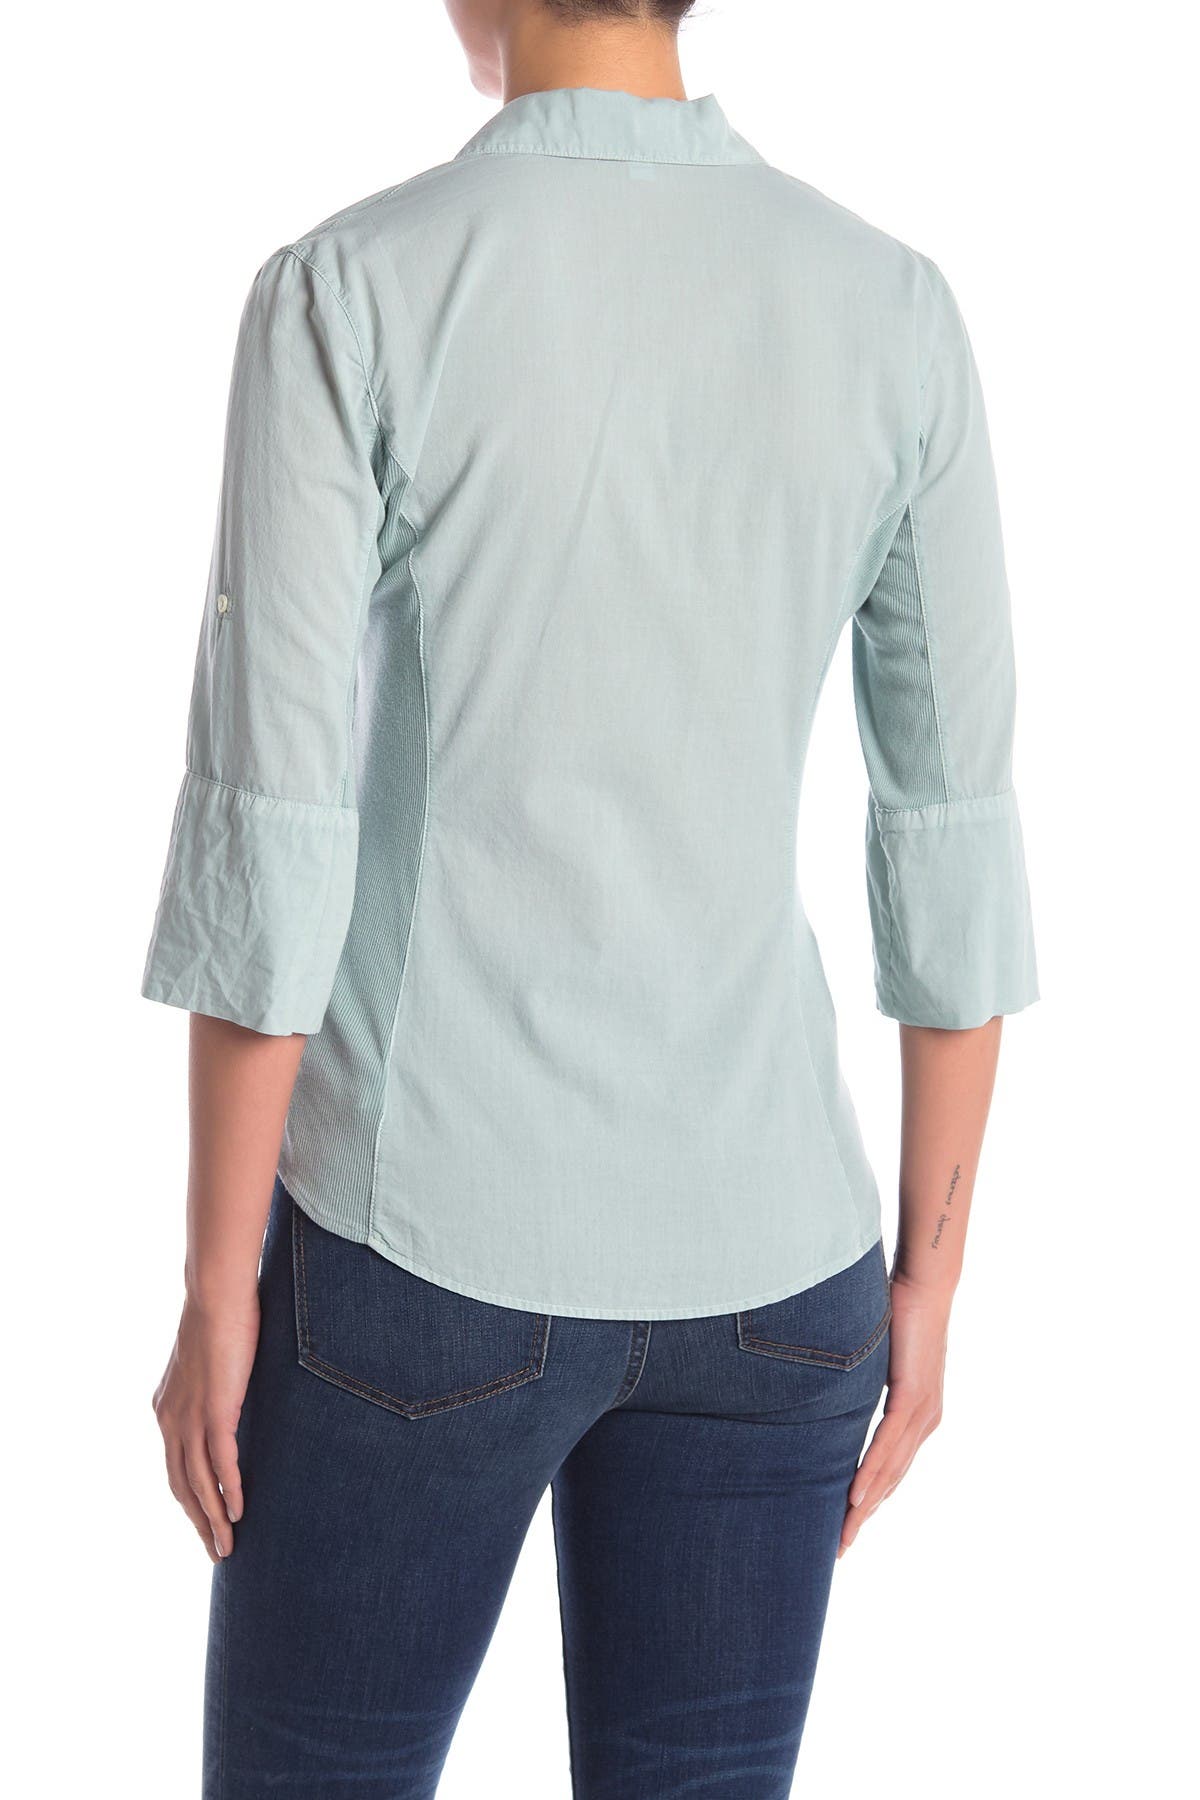 James Perse Contrast Ribbed Surplus Shirt In Light/pastel Blue2